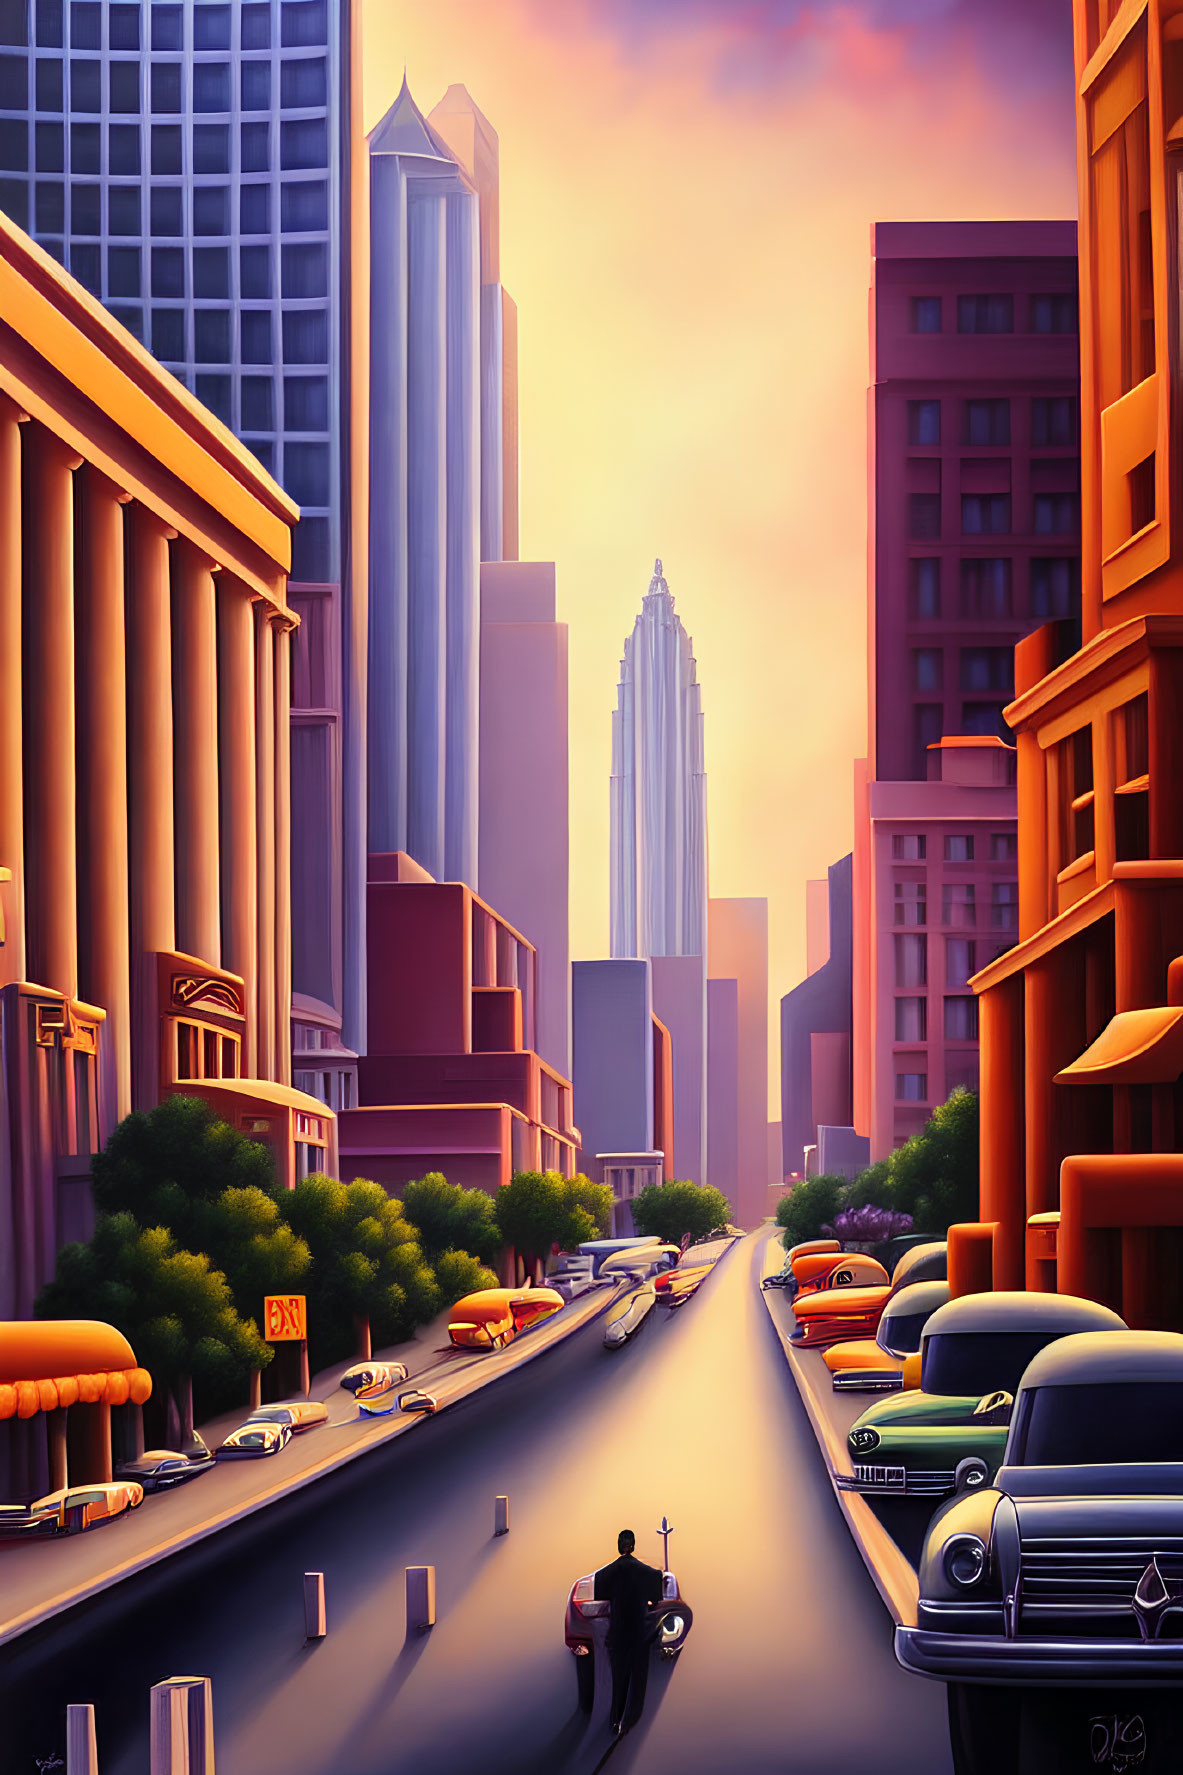 Cityscape at Sunset: Person Crossing Street, 1950s Cars, Skyscrapers -